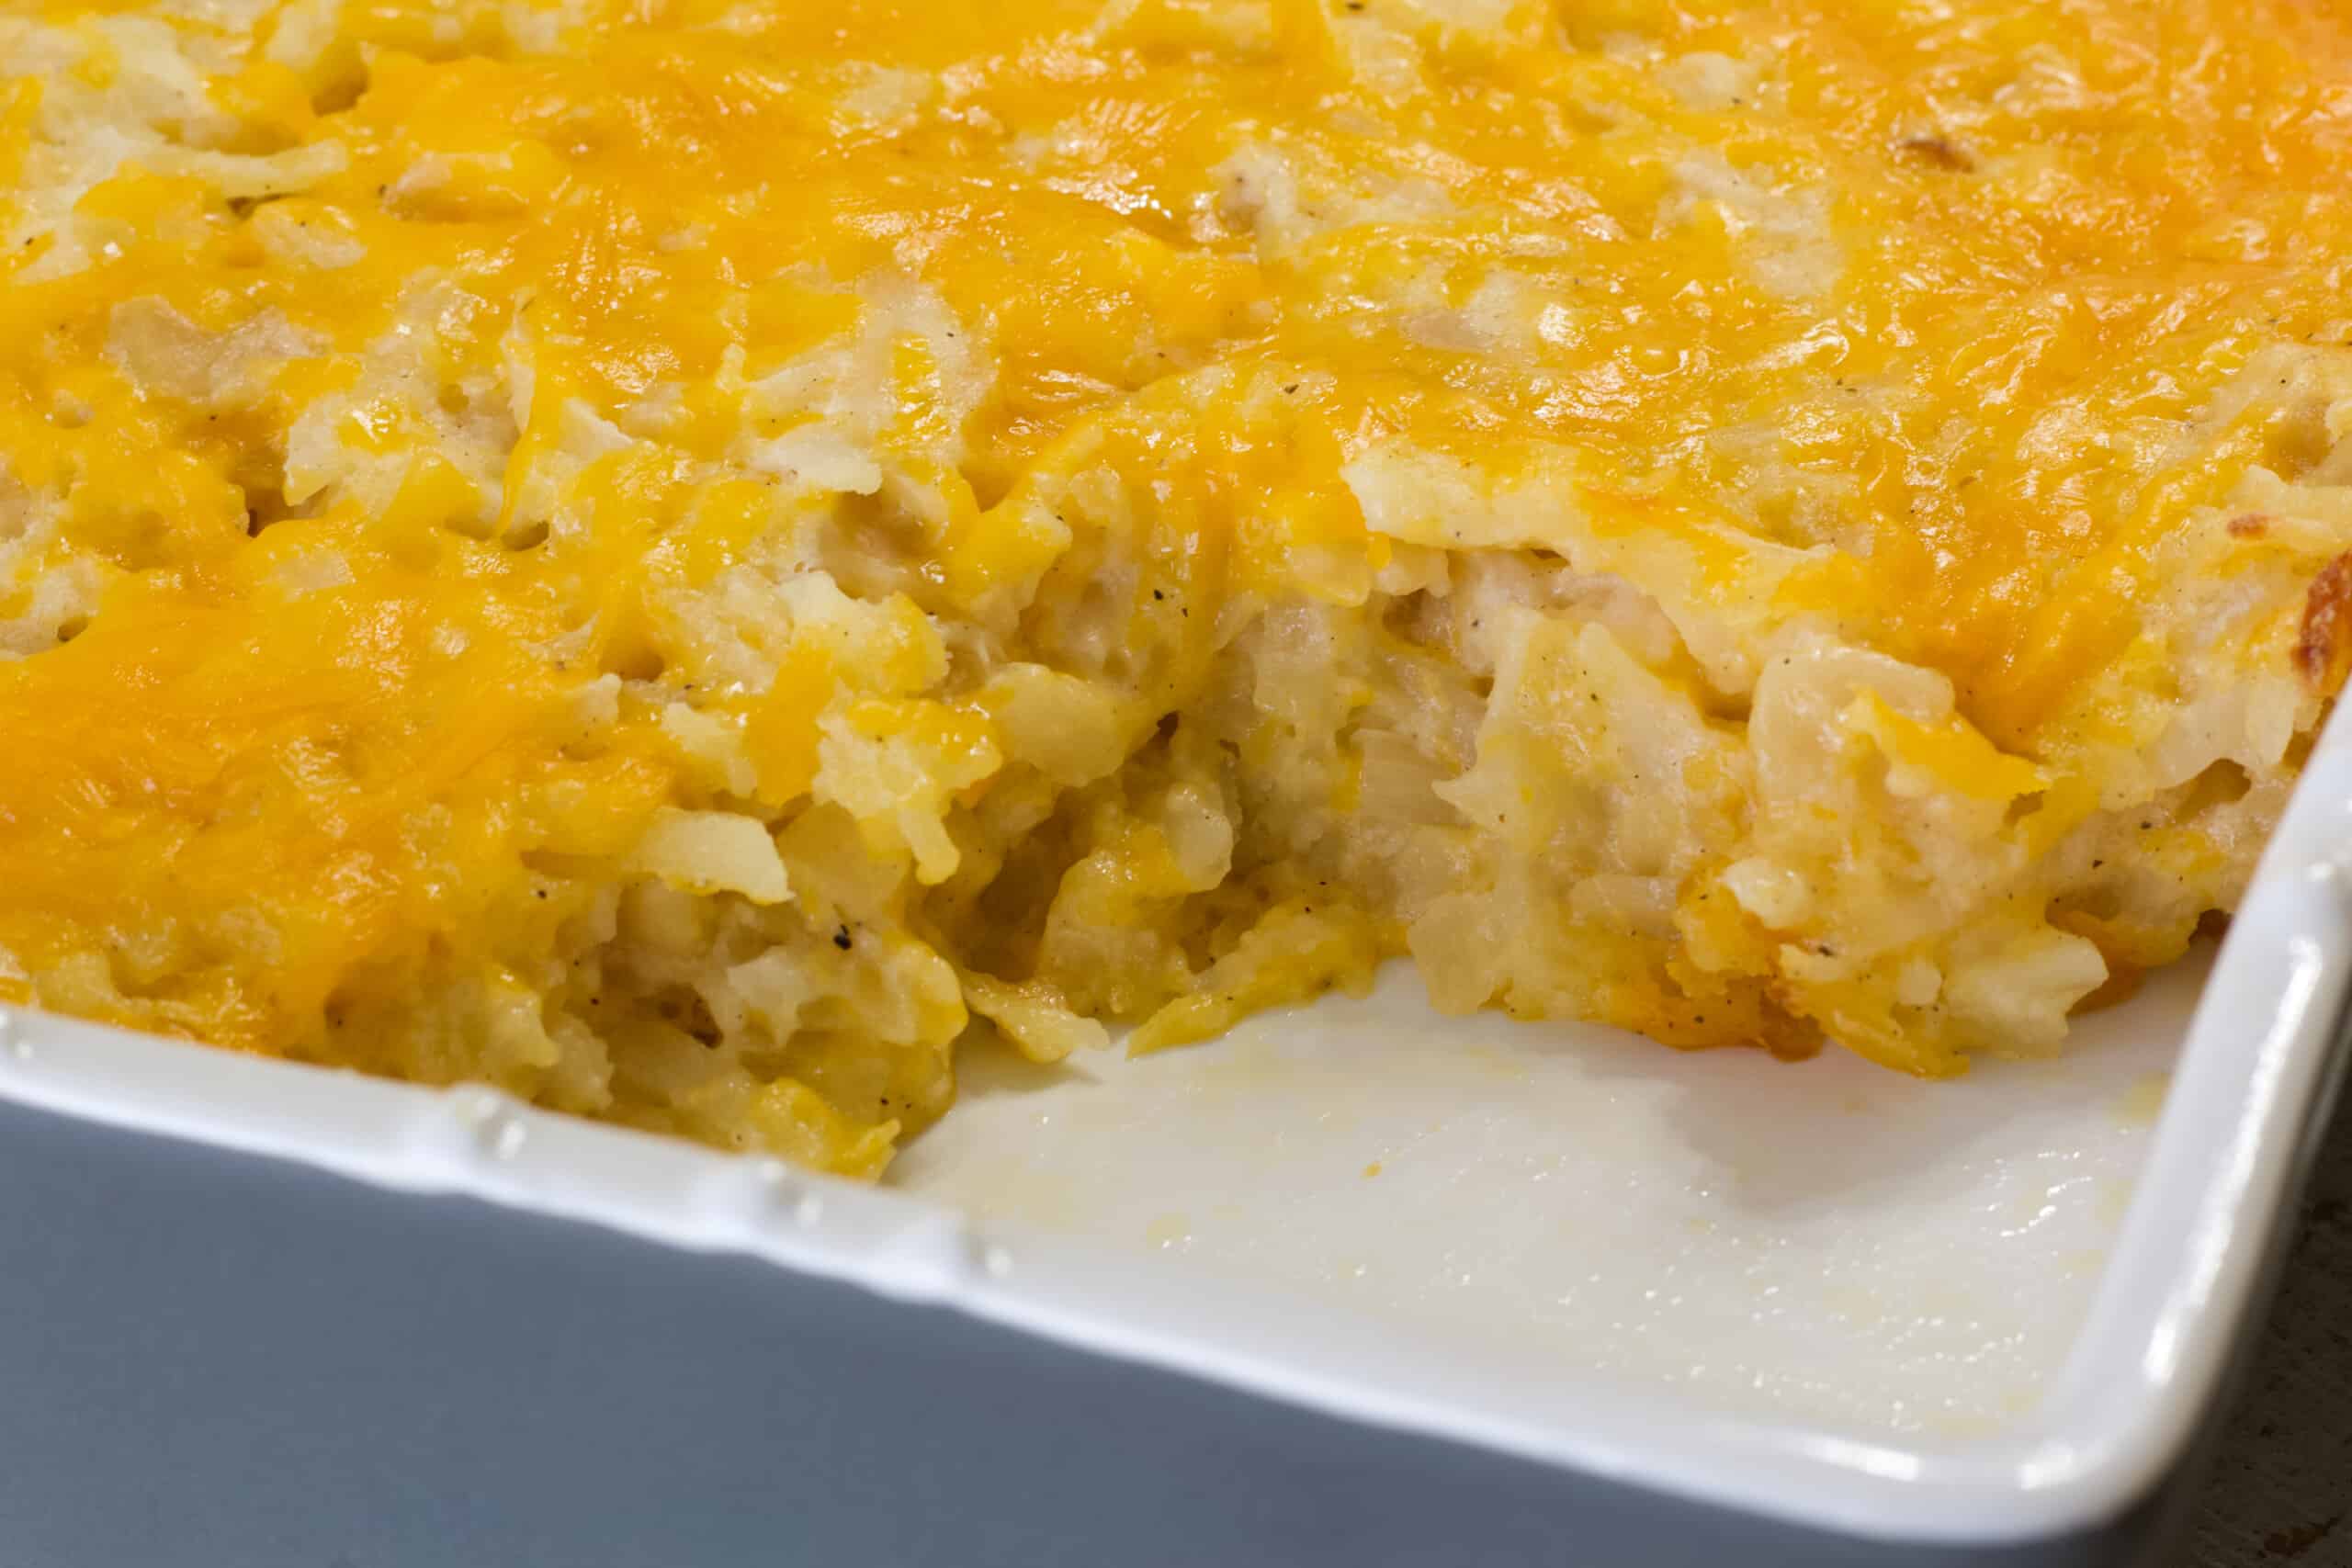 The corner of the casserole dish with one serving of the vegetarian cracker barrel hashbrown casserole with one serving missing.